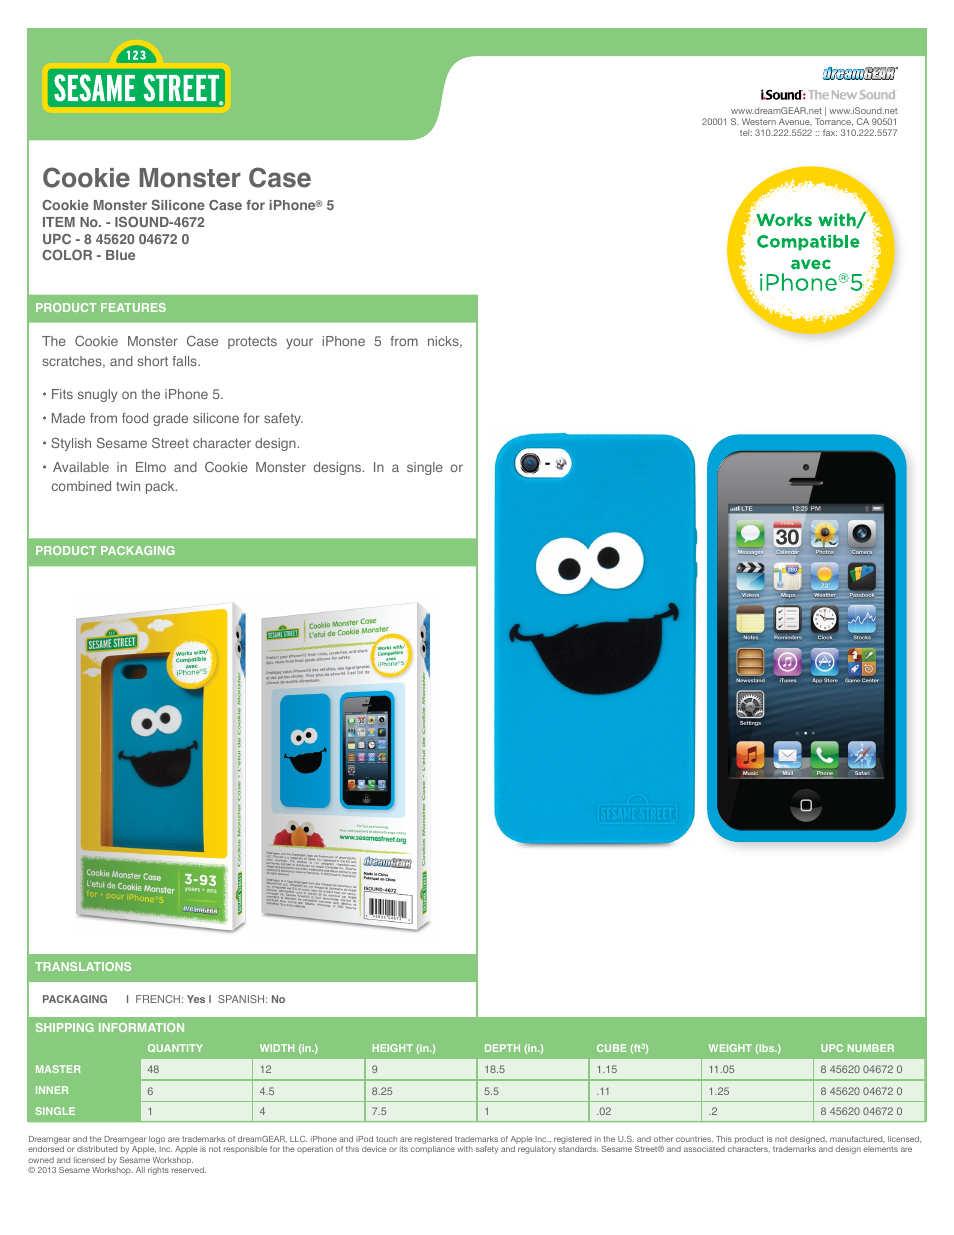 Cookie Monster Case for iPhone5 - Sell Sheet